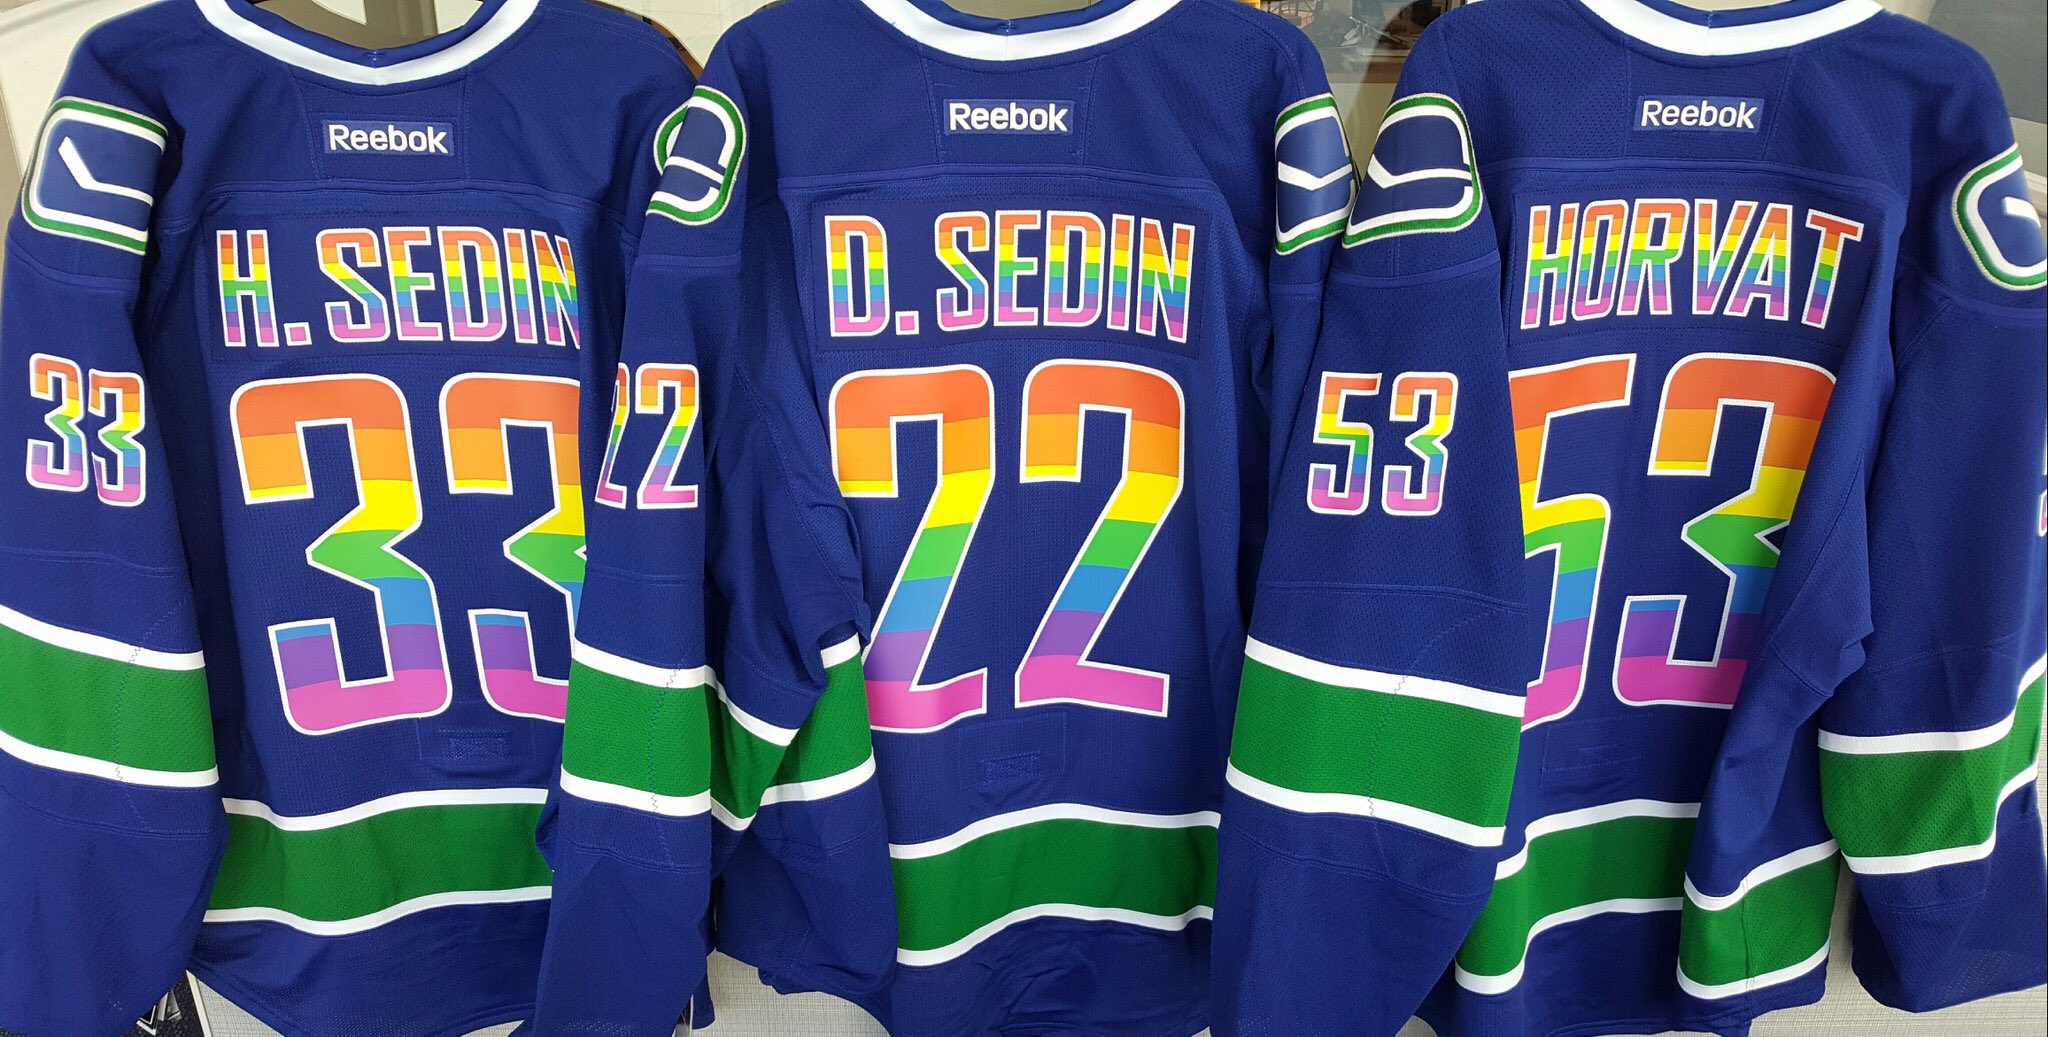 For many, Canucks' pride jerseys are a must